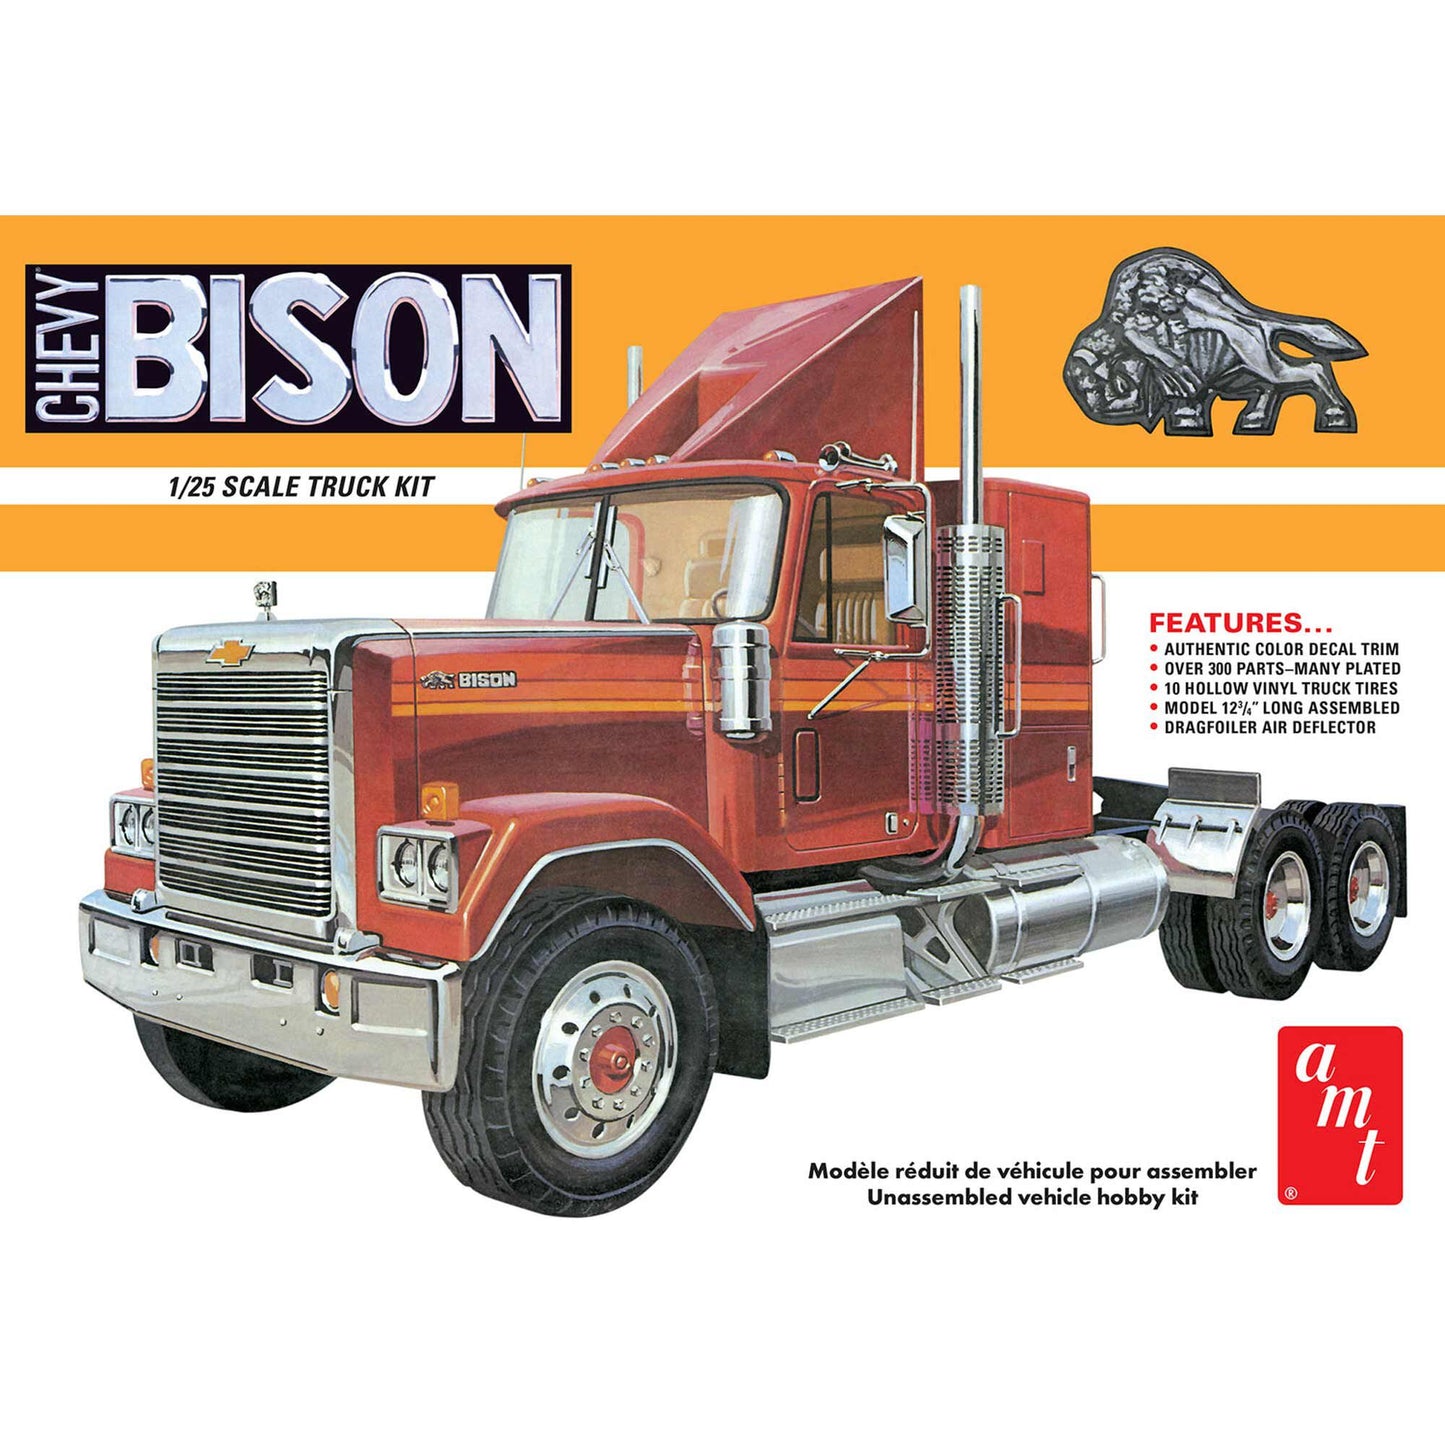 Chevrolet Bison Conventional Tractor 1:25